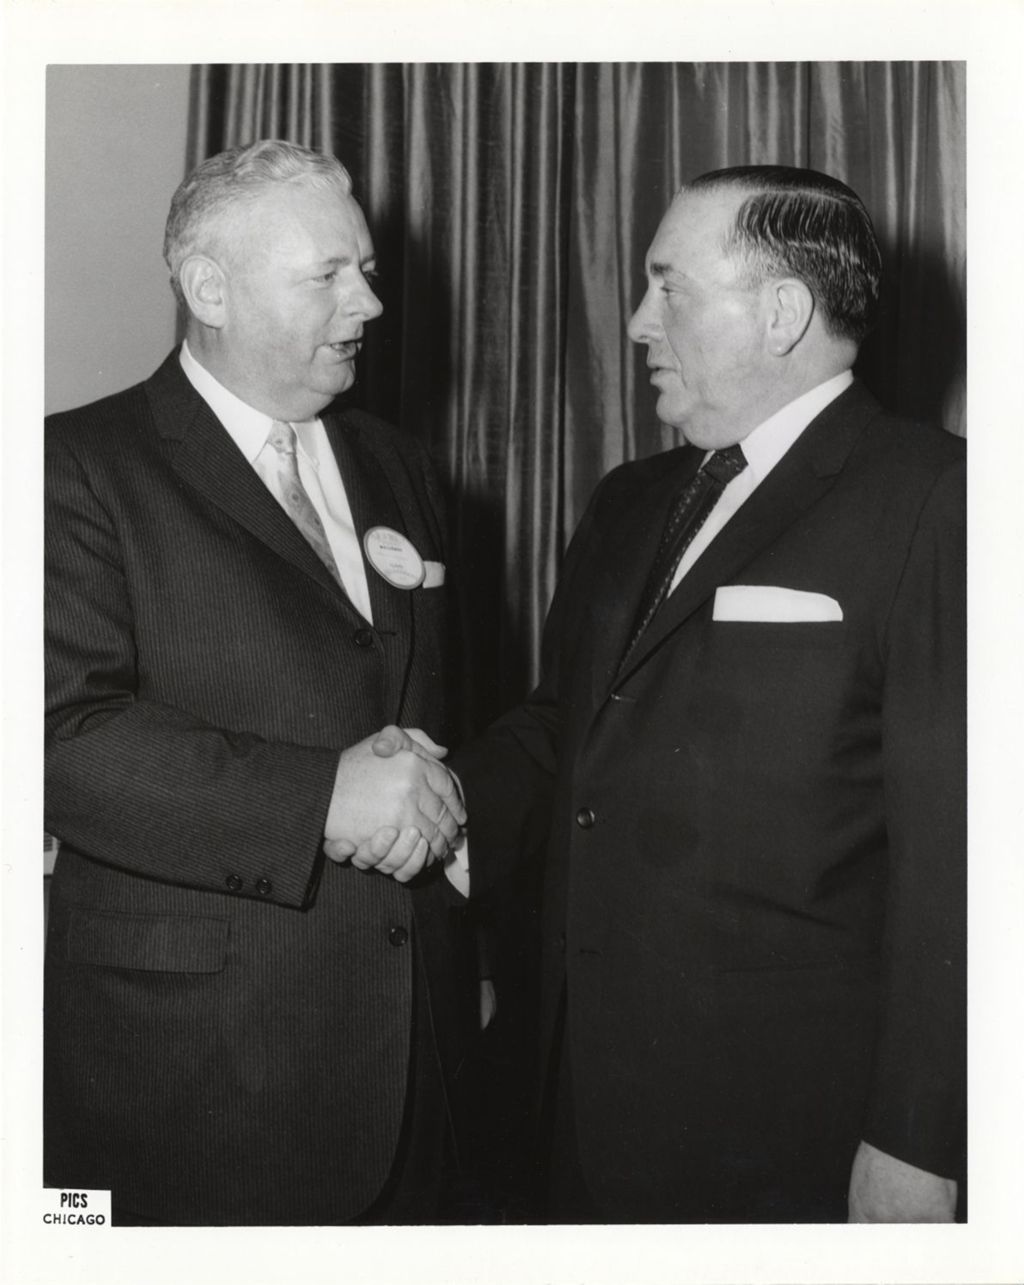 Miniature of Richard J. Daley shaking hands with a man